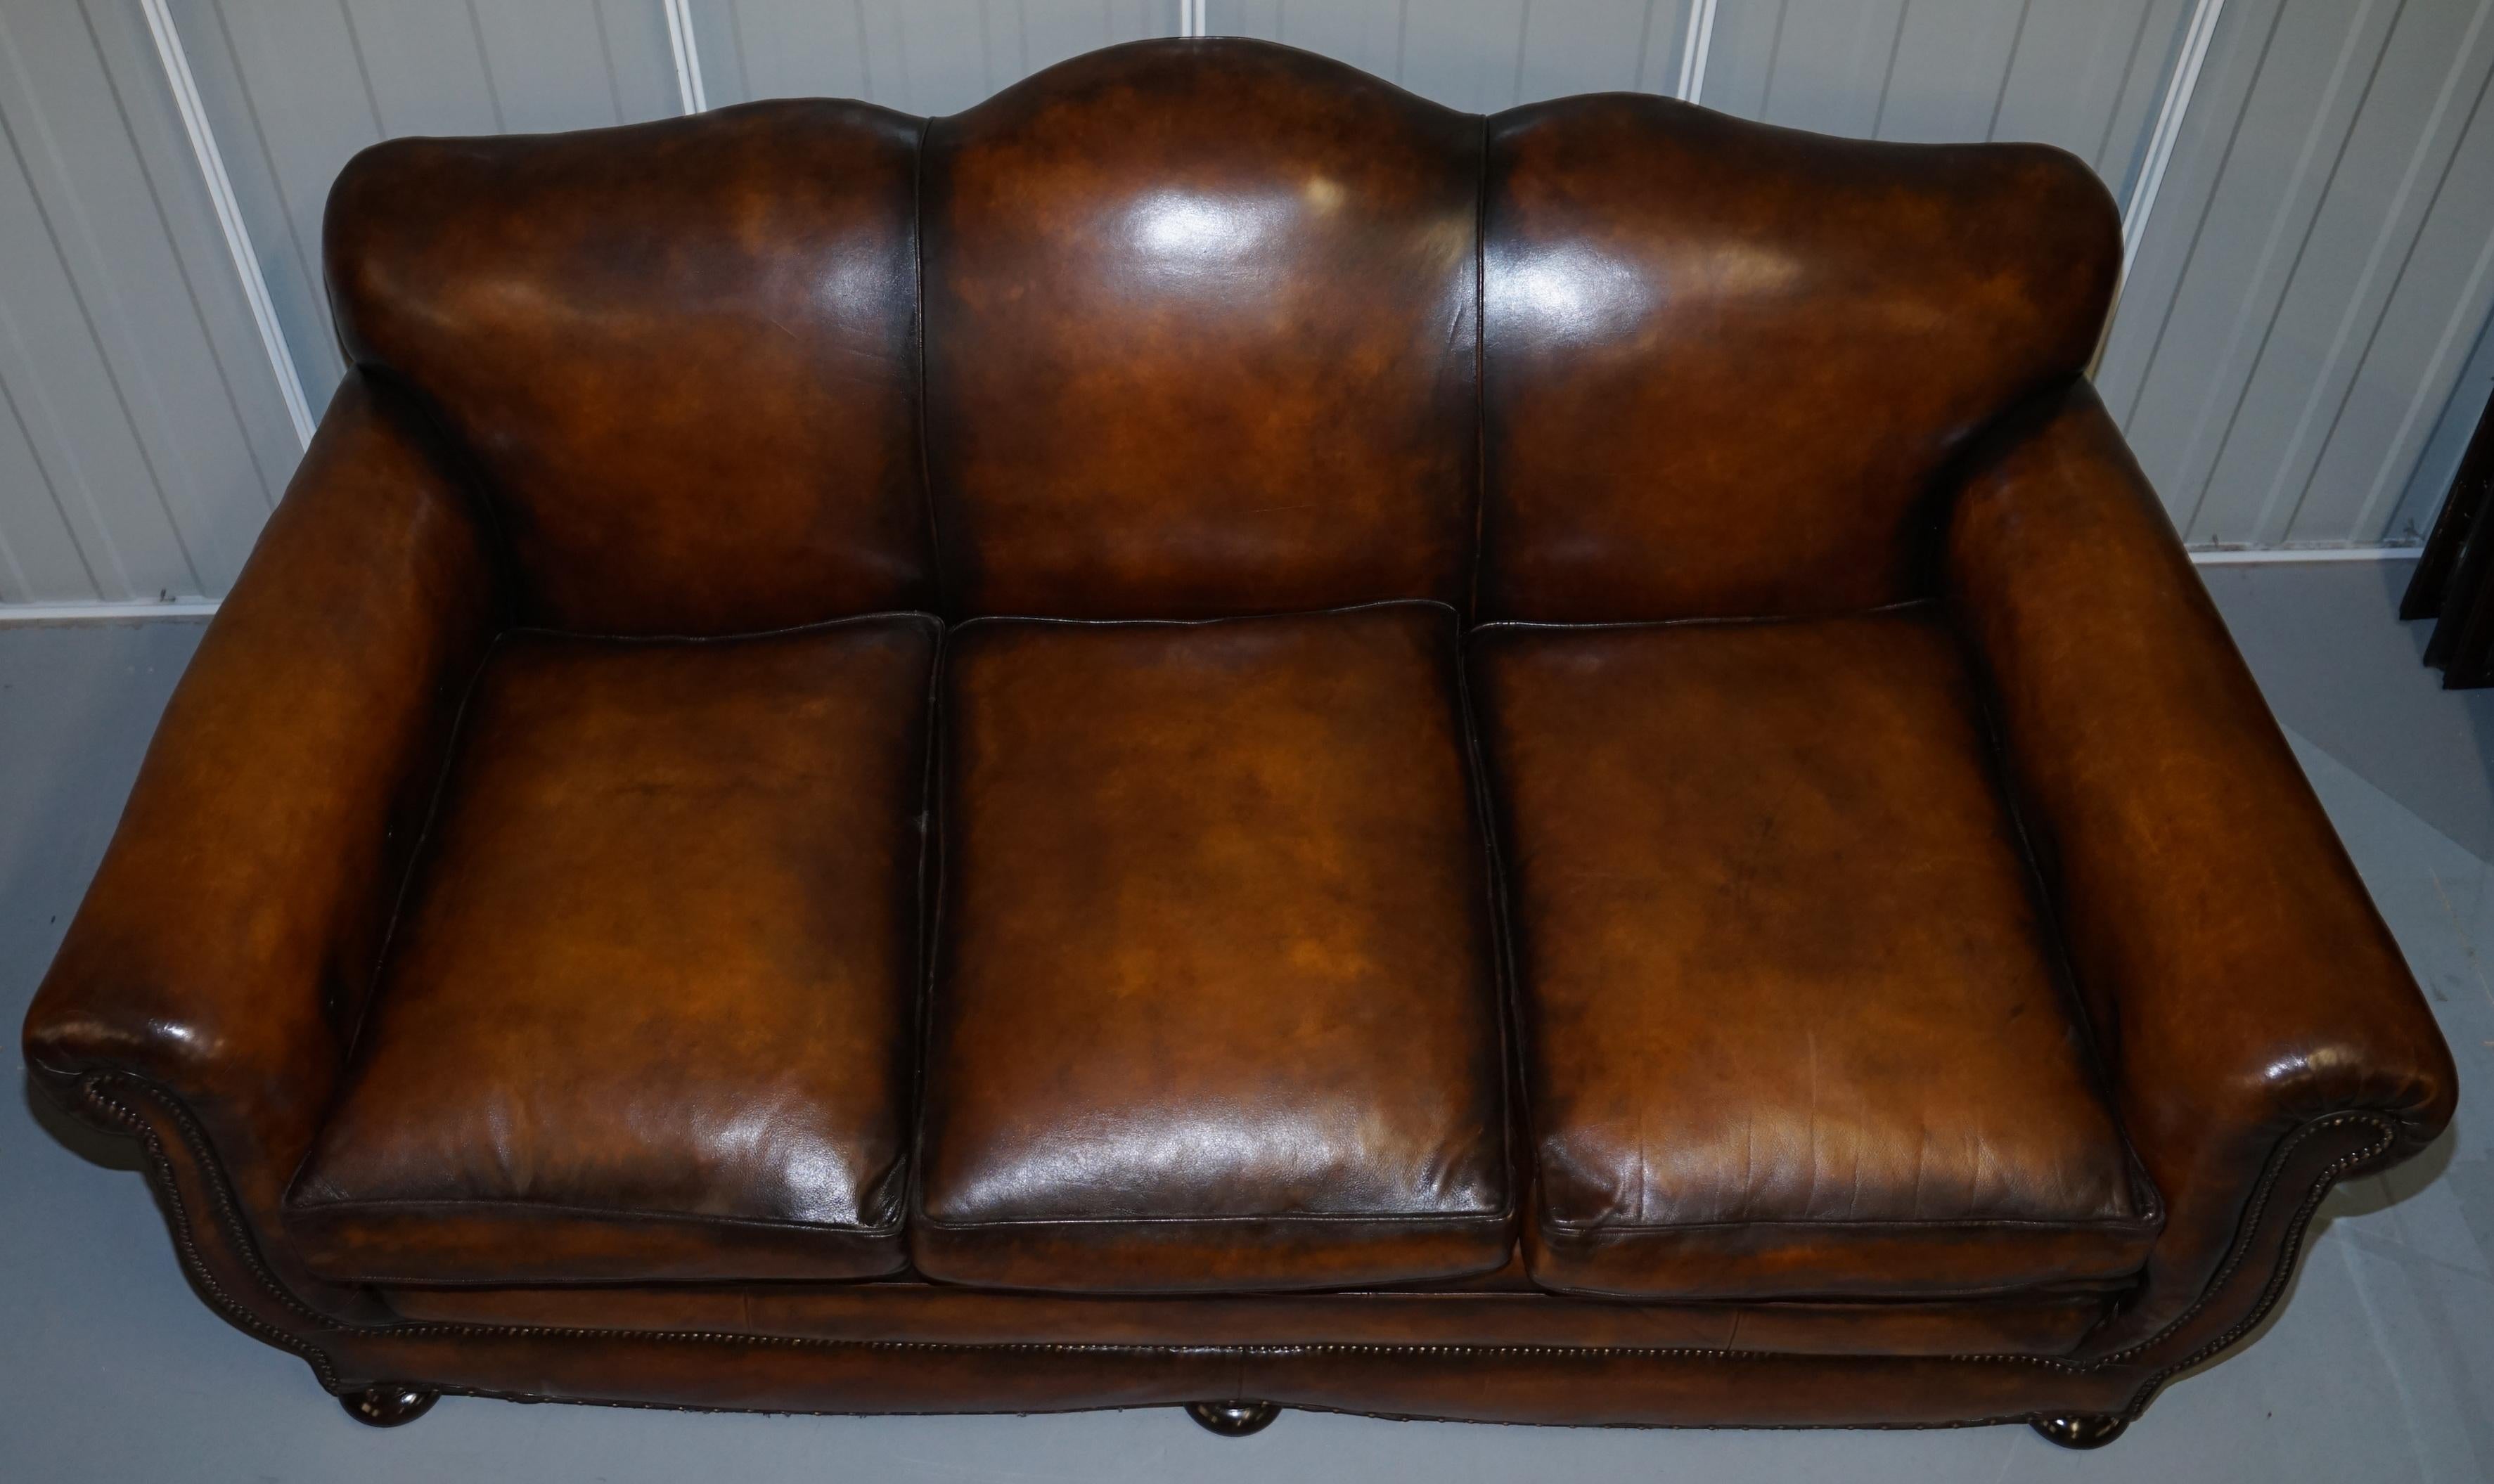 old leather couches for sale